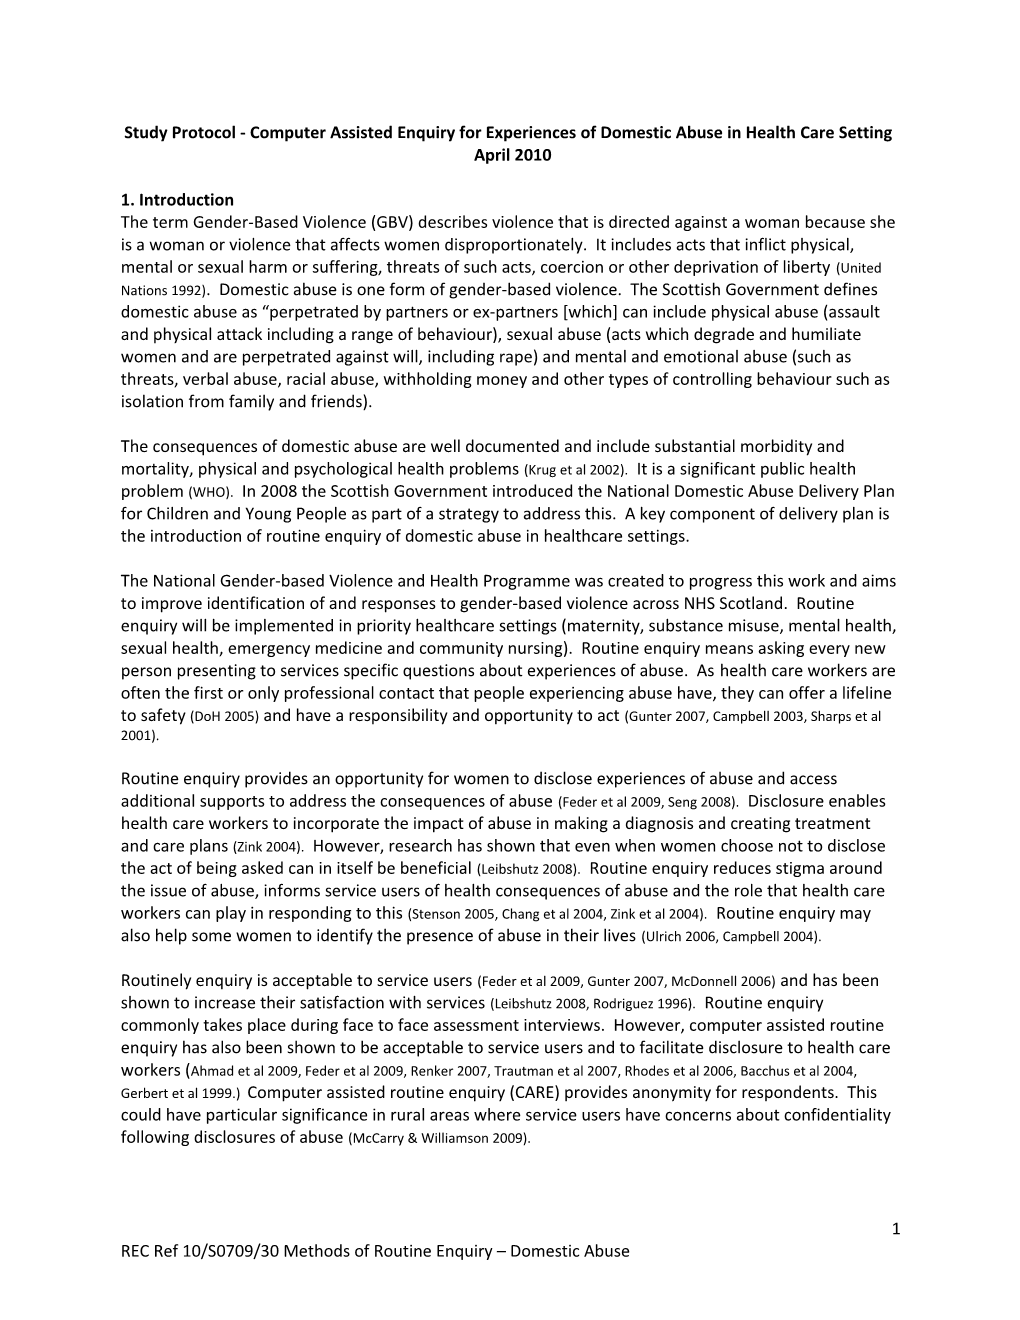 Study Protocol - Computer Assisted Enquiry for Experiences of Domestic Abuse in Health